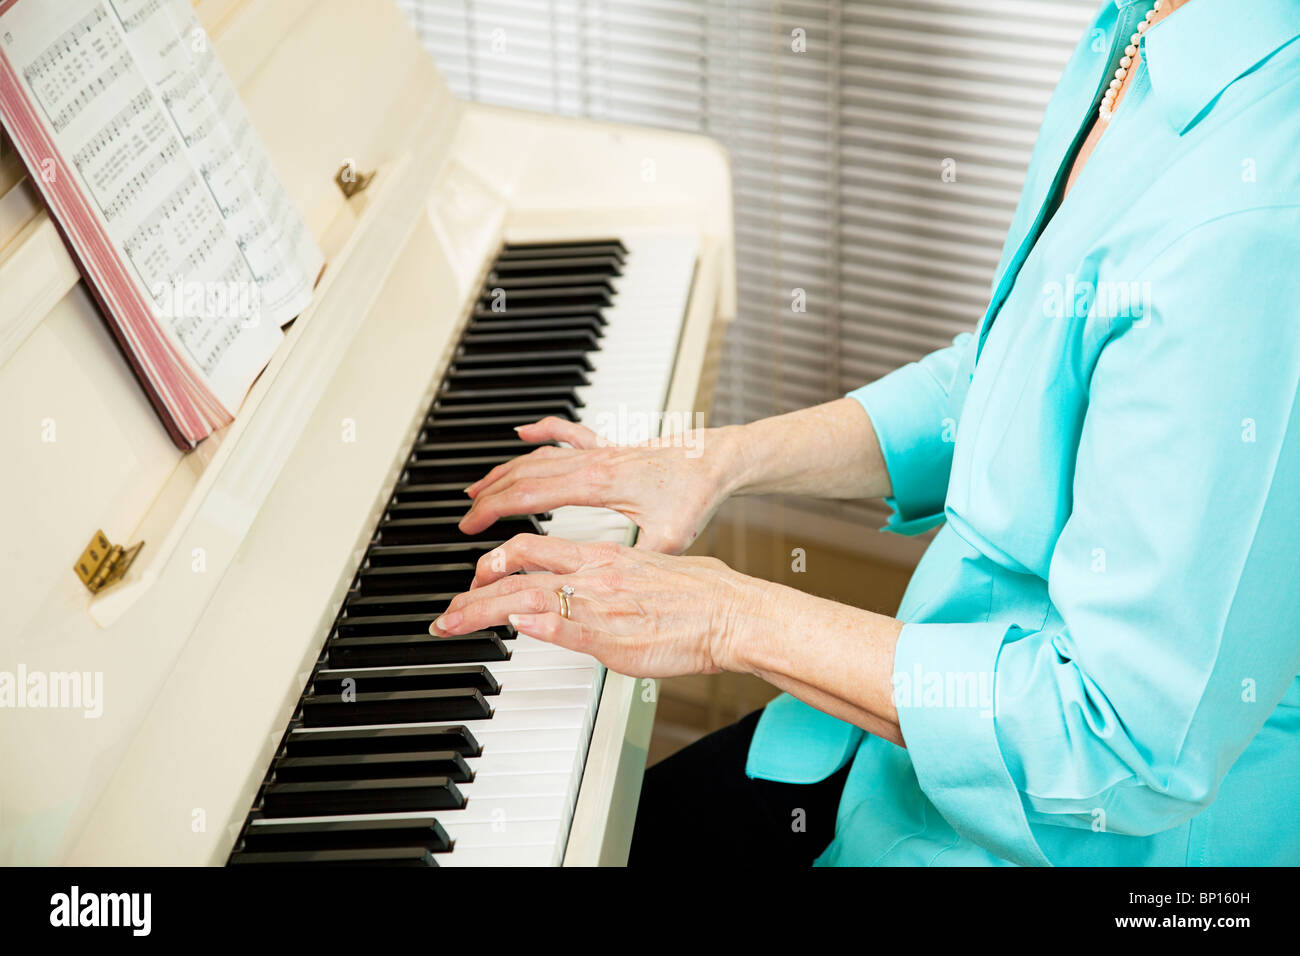 Closeup of a pianists hands as she plays a hymn at church. Shallow depth of field. Stock Photo